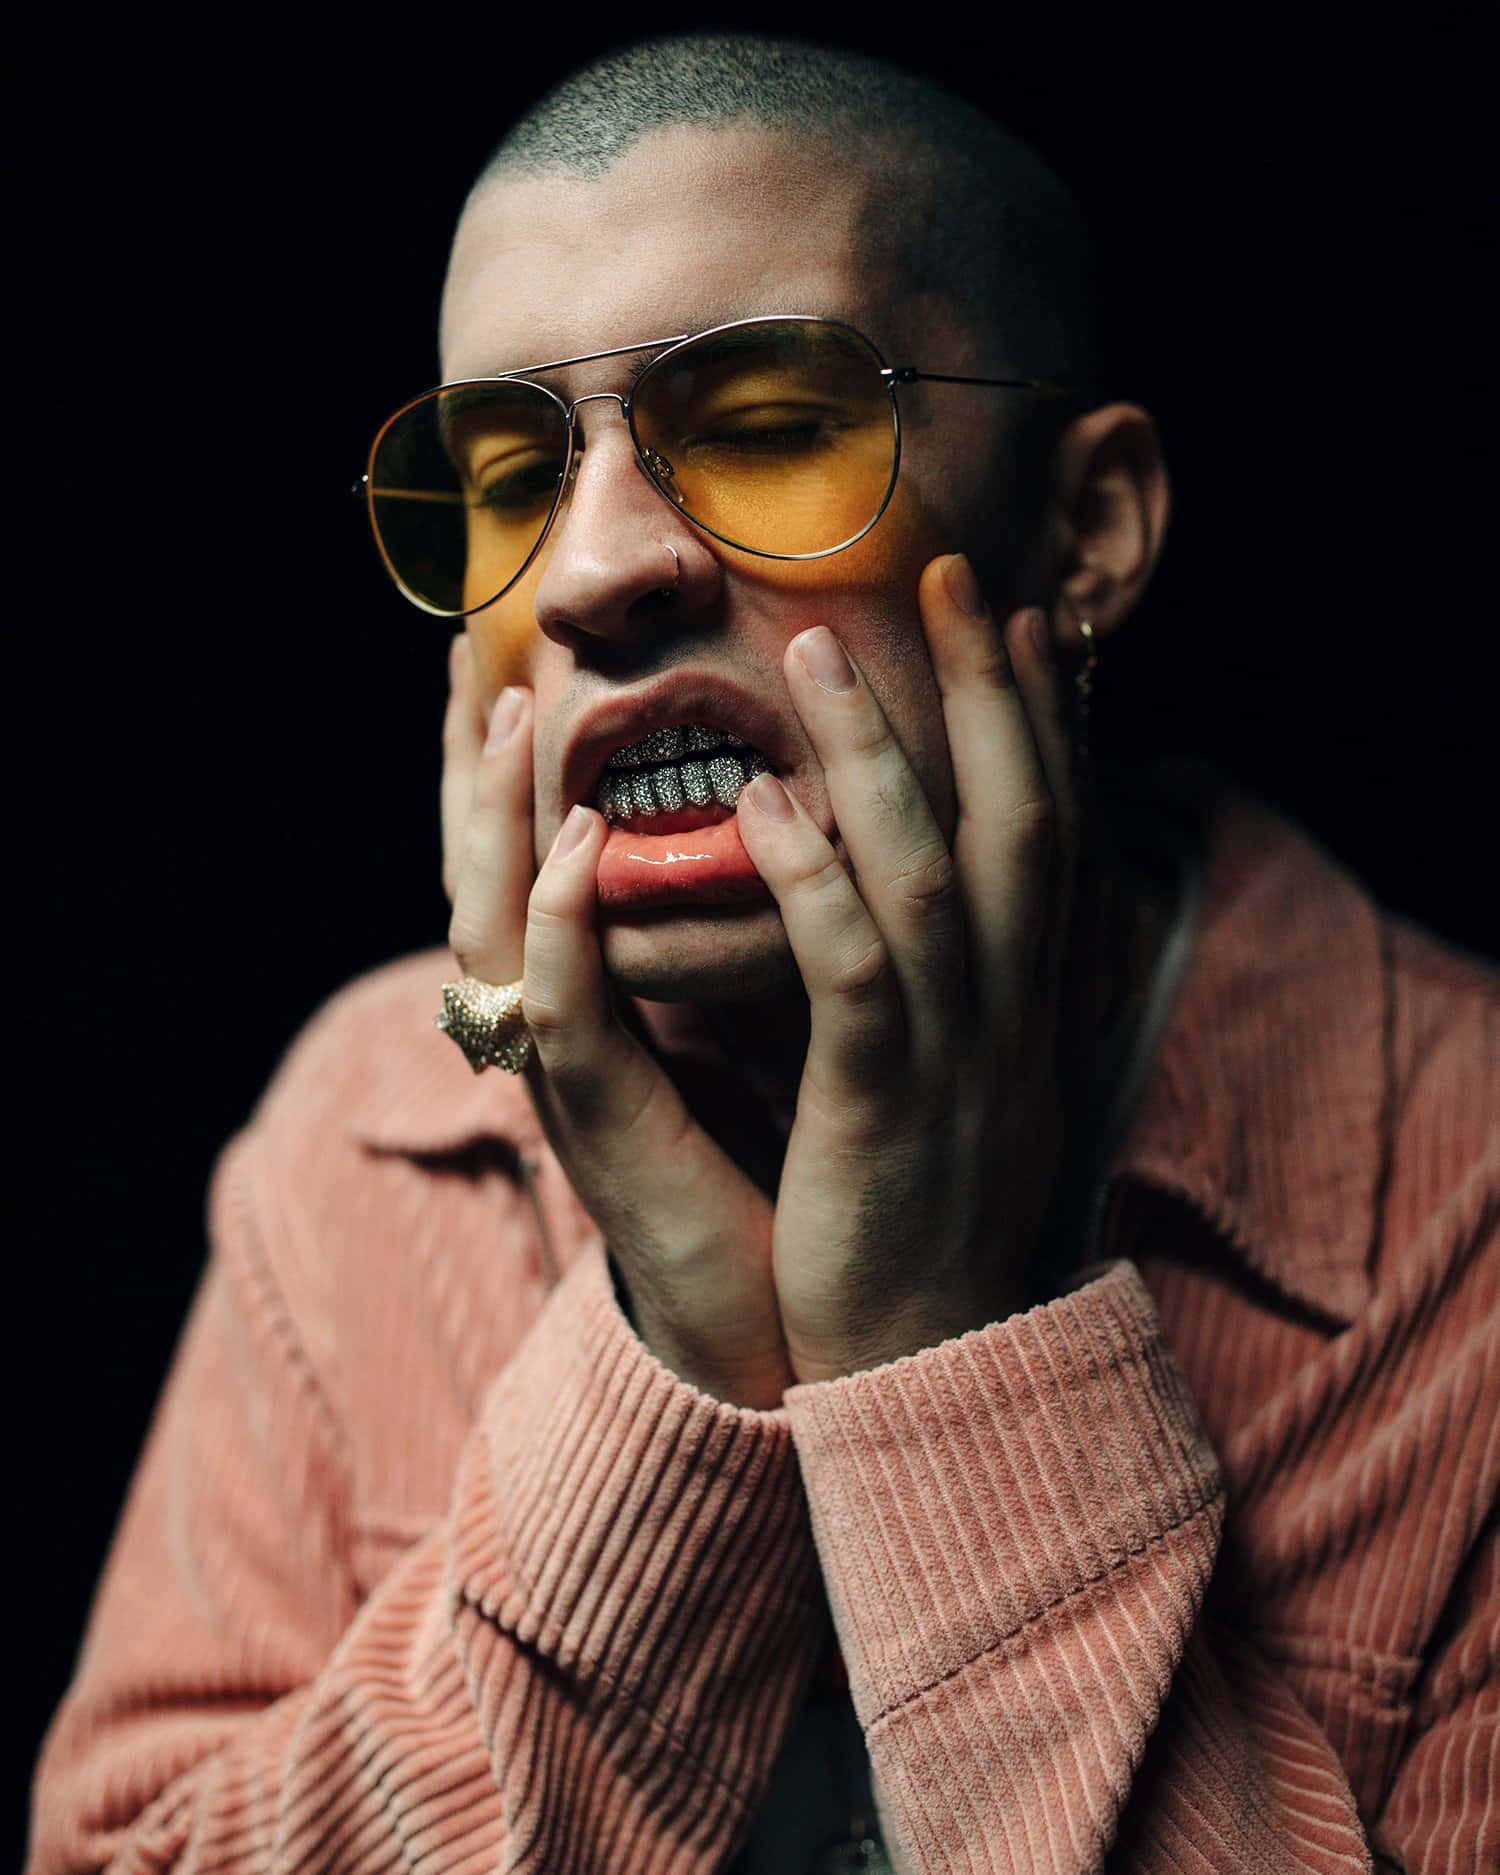 Eventing a dynamic performance, Bad Bunny electrifies his crowd